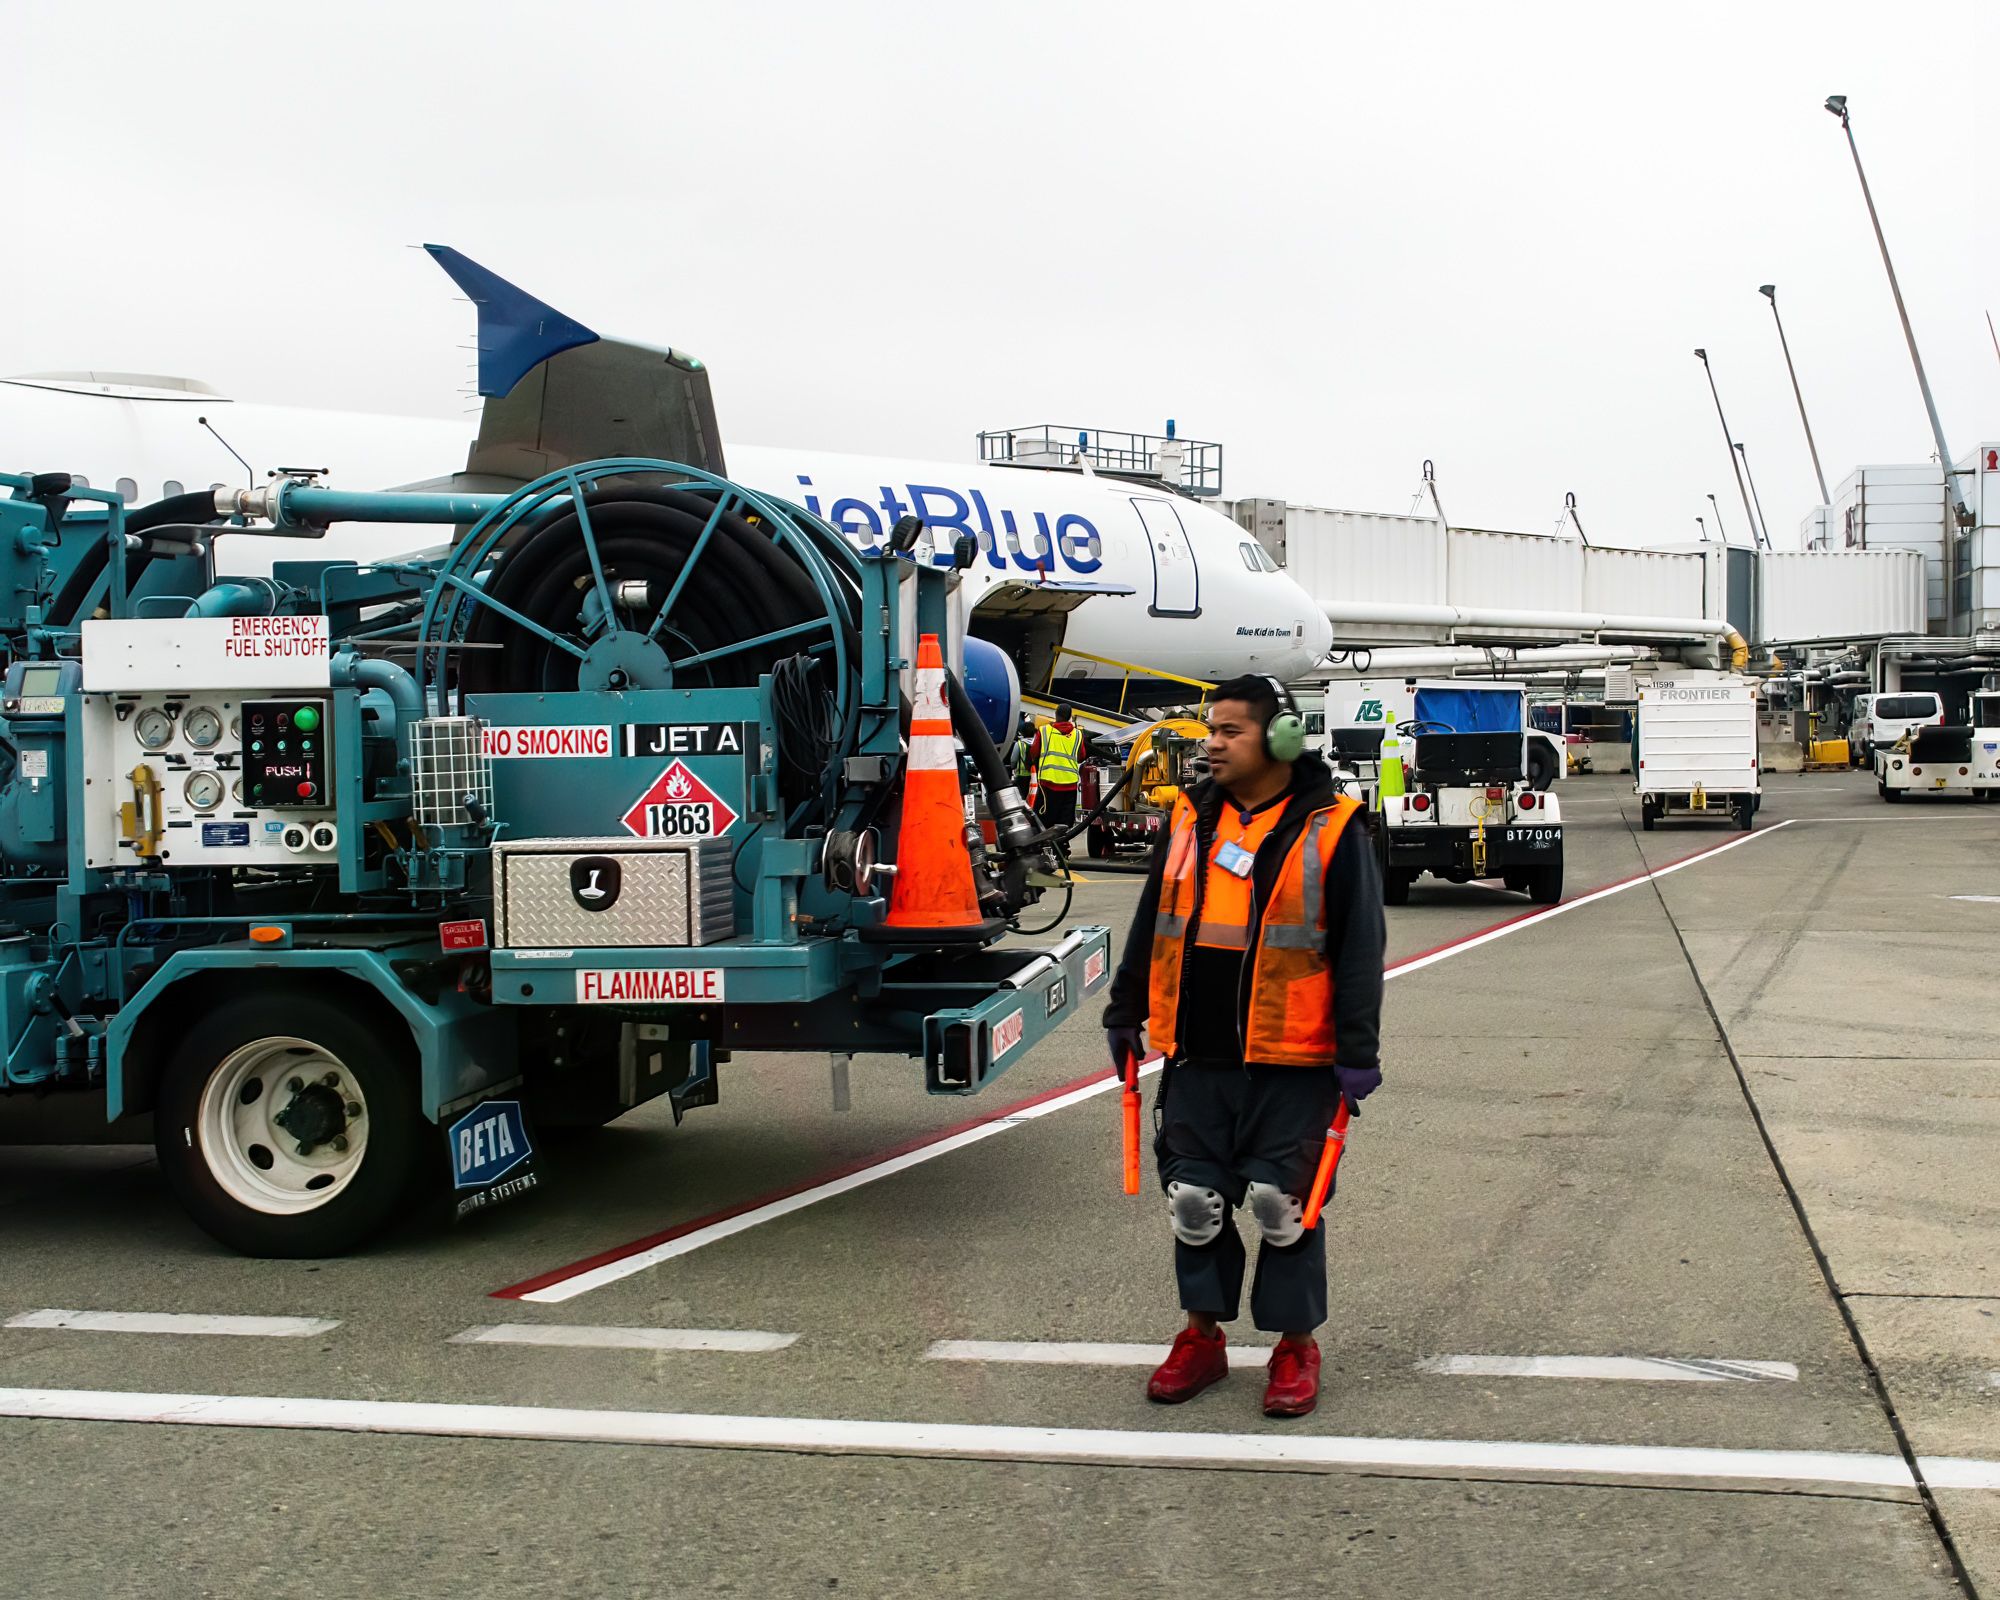 A ground crew worker standing on an airport apron next to a refueling truck and a JetBlue Airbus A321.